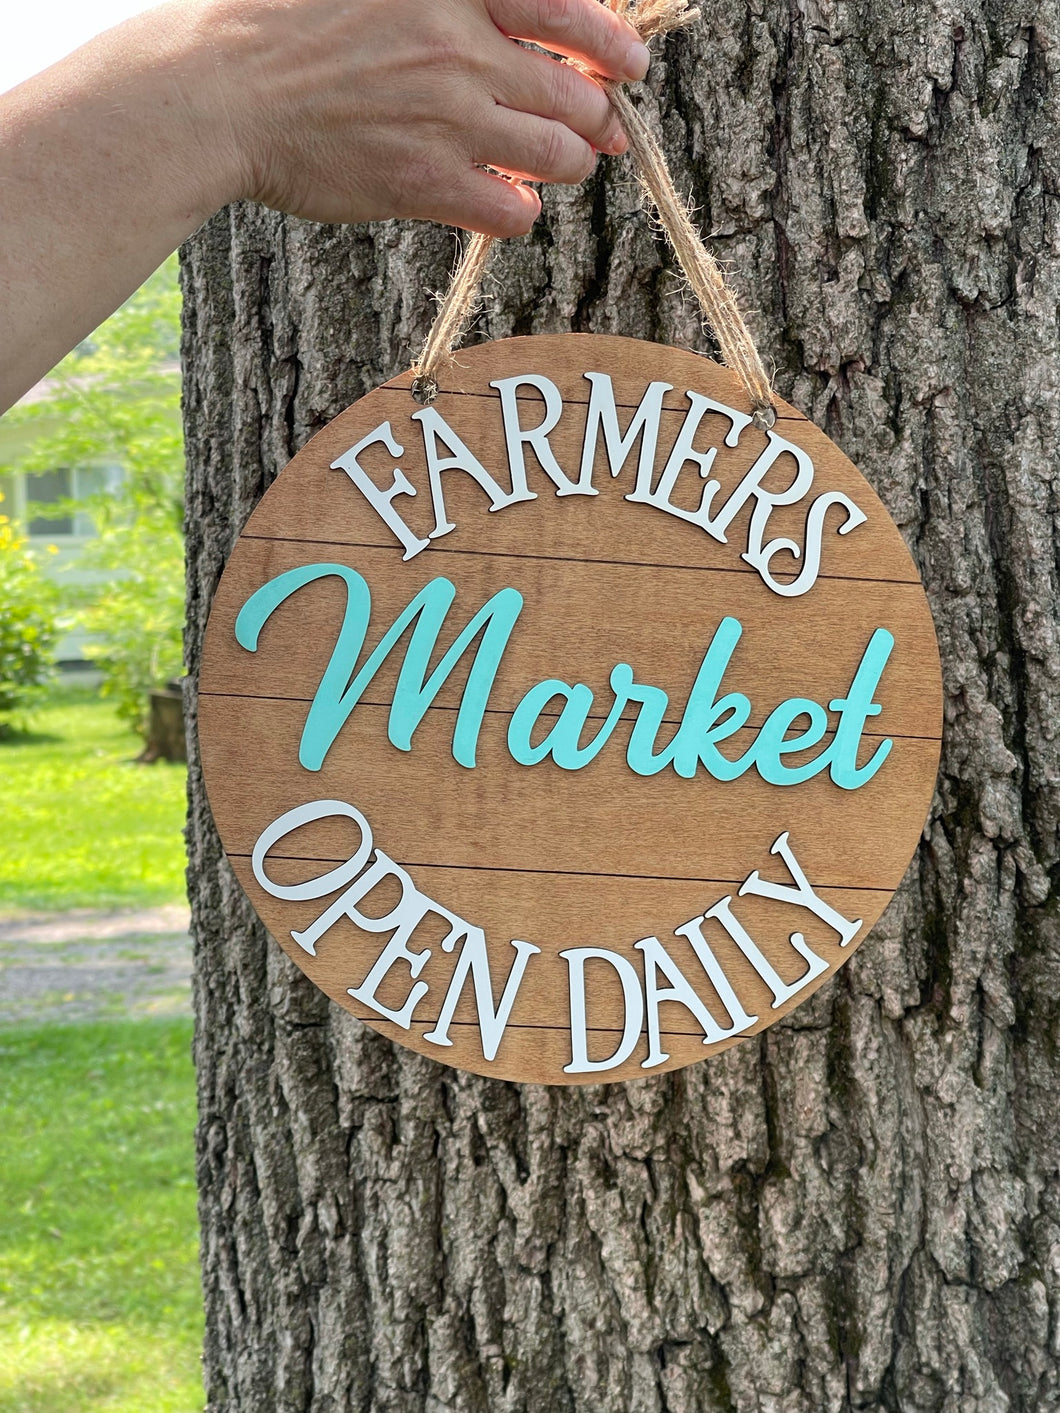 Farmers Market Round Shiplap Layered Sign Open Daily